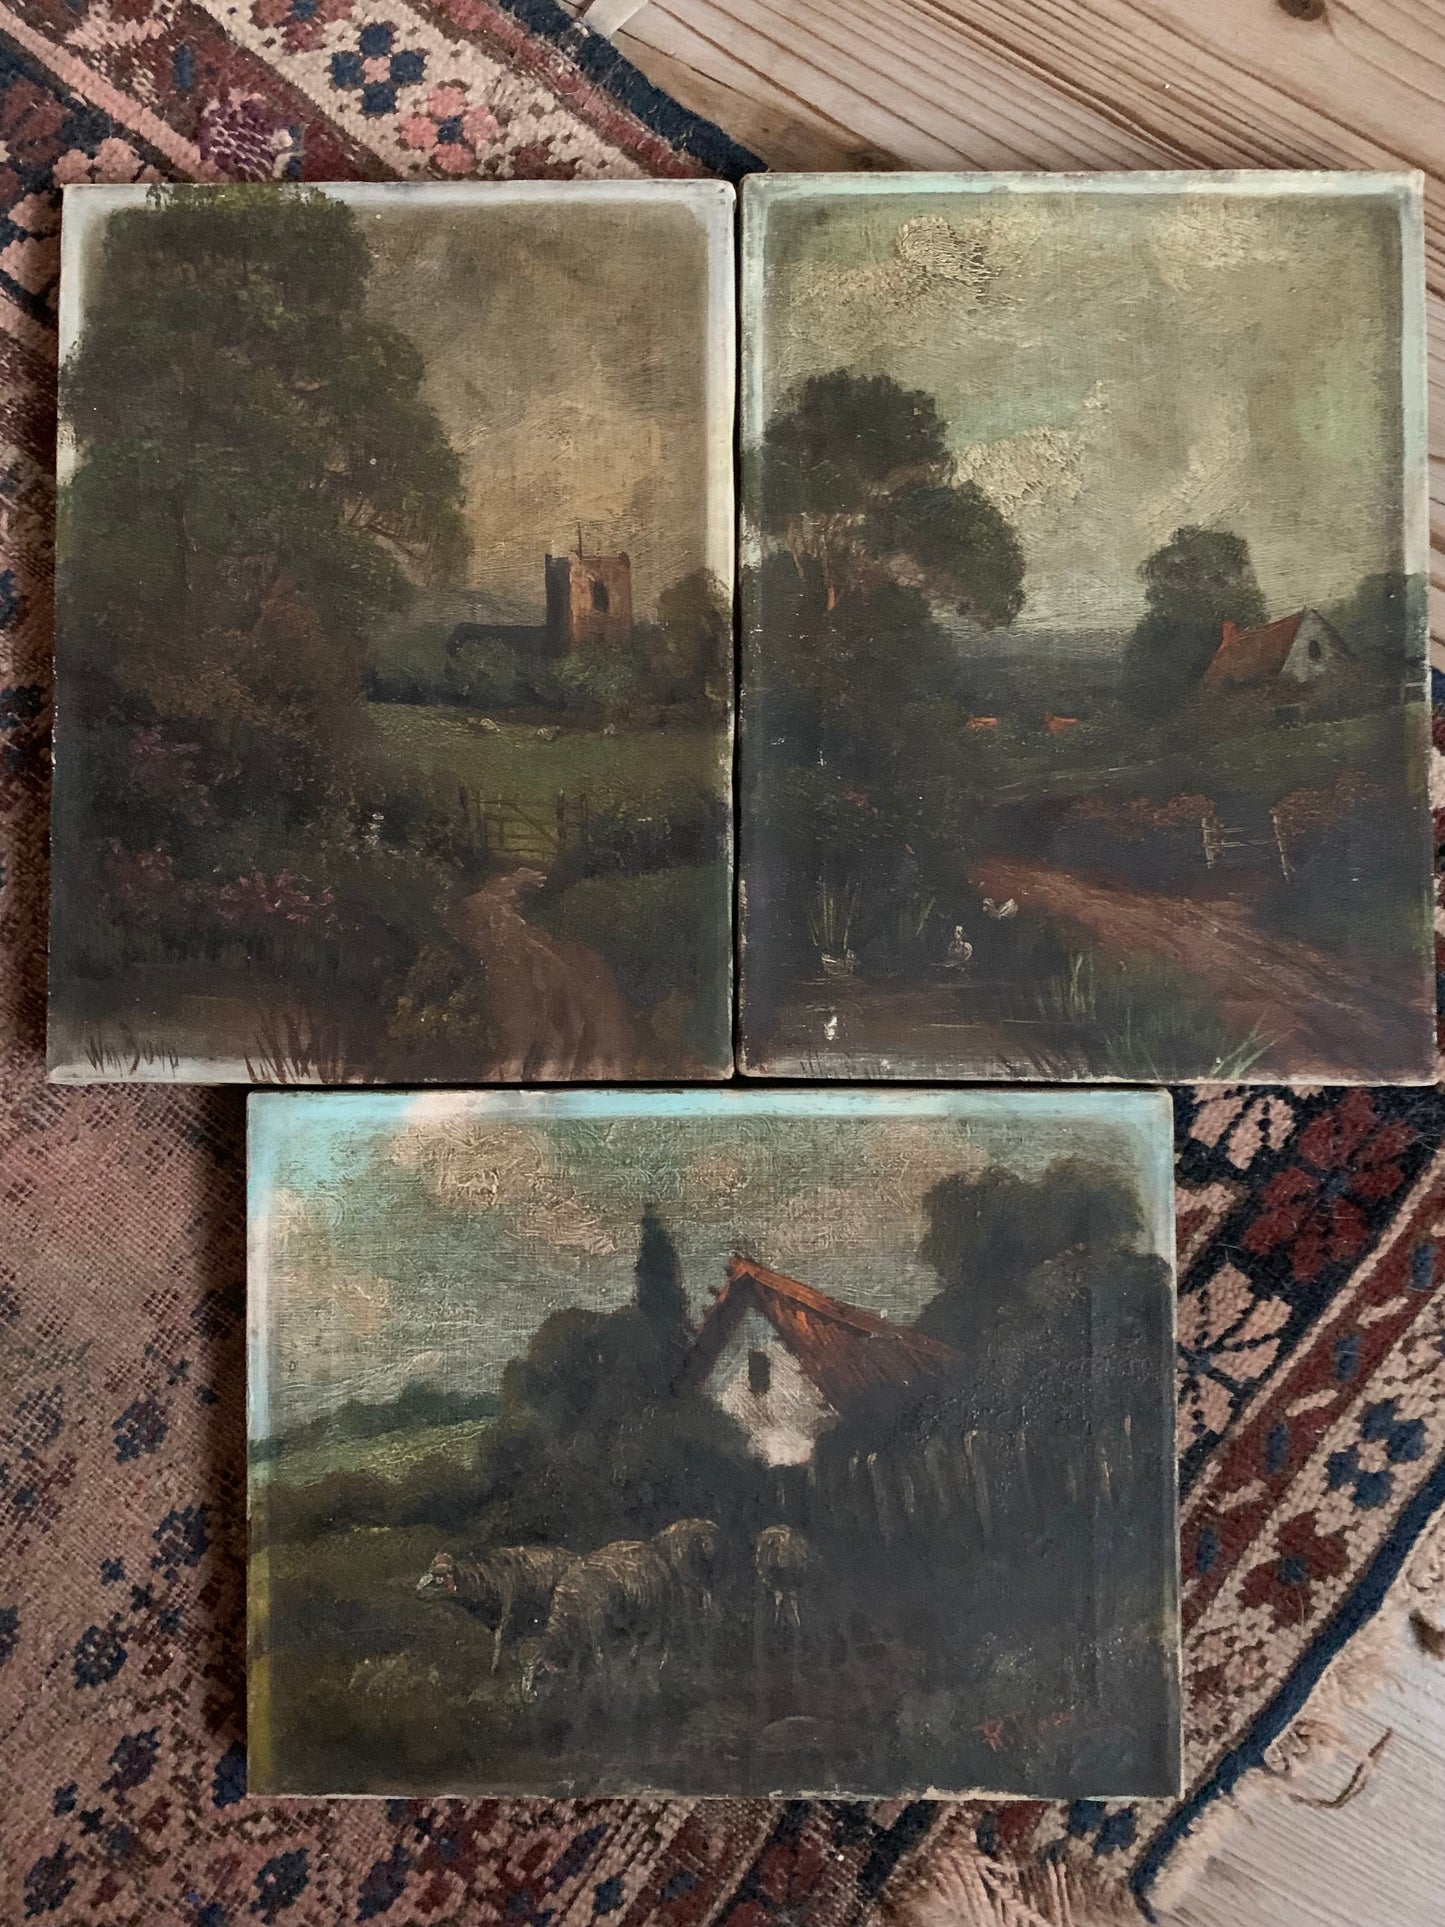 Antique rural landscape painting with sheep on canvas